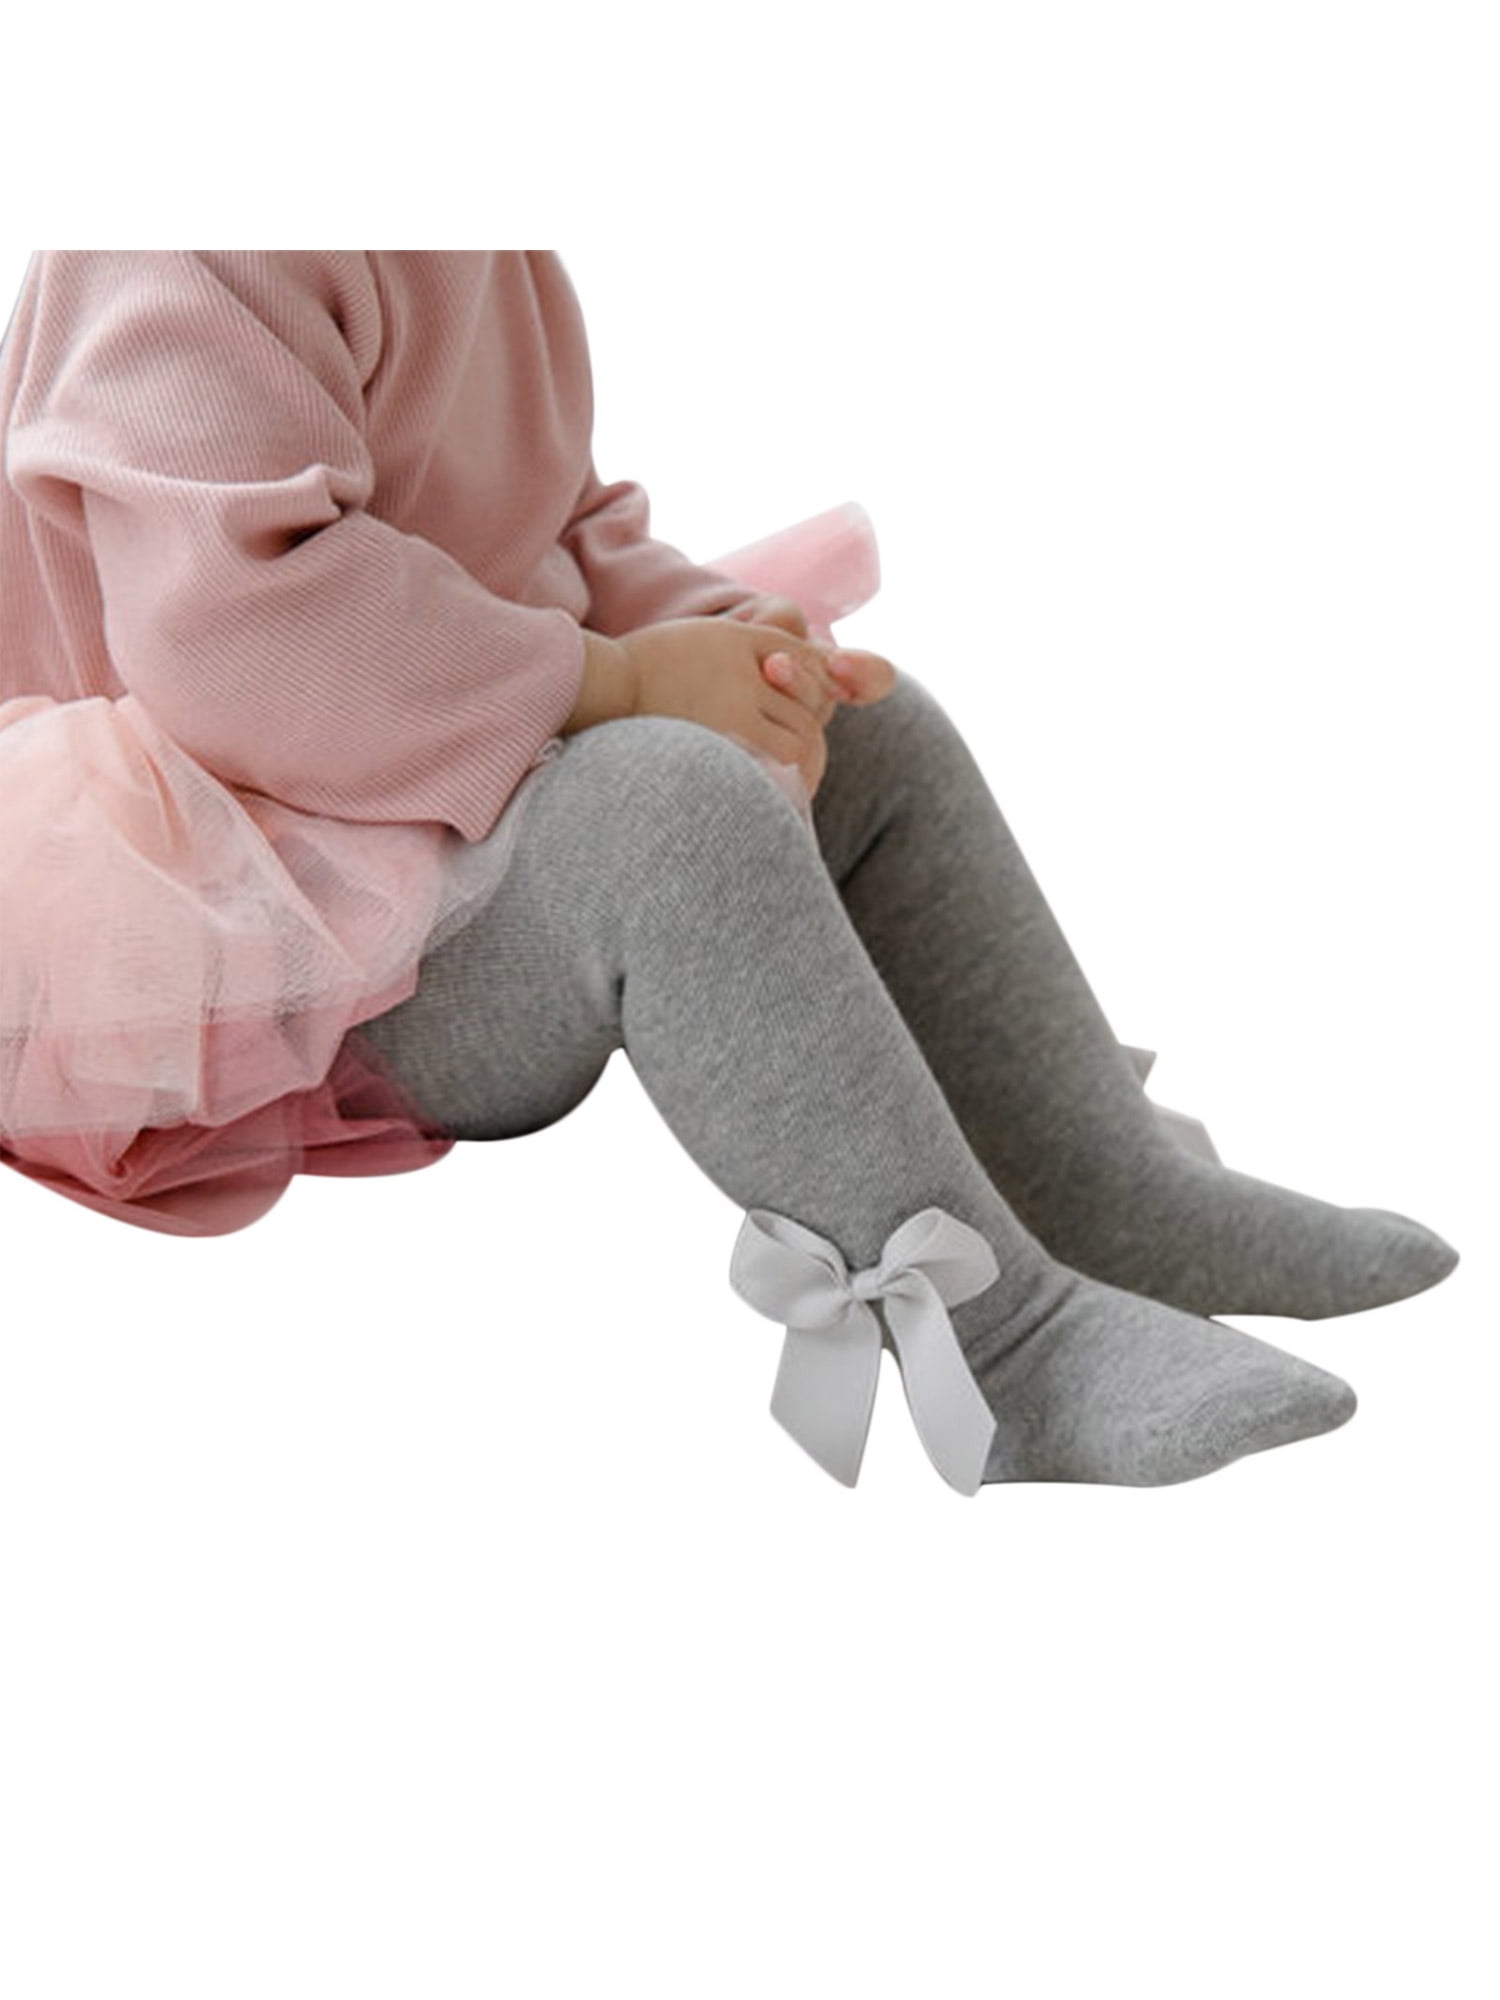 Infant Baby Girls Tights Knit Stretchy Leggings Stockings Cotton Pantyhose  with Bowknot 0-24M 